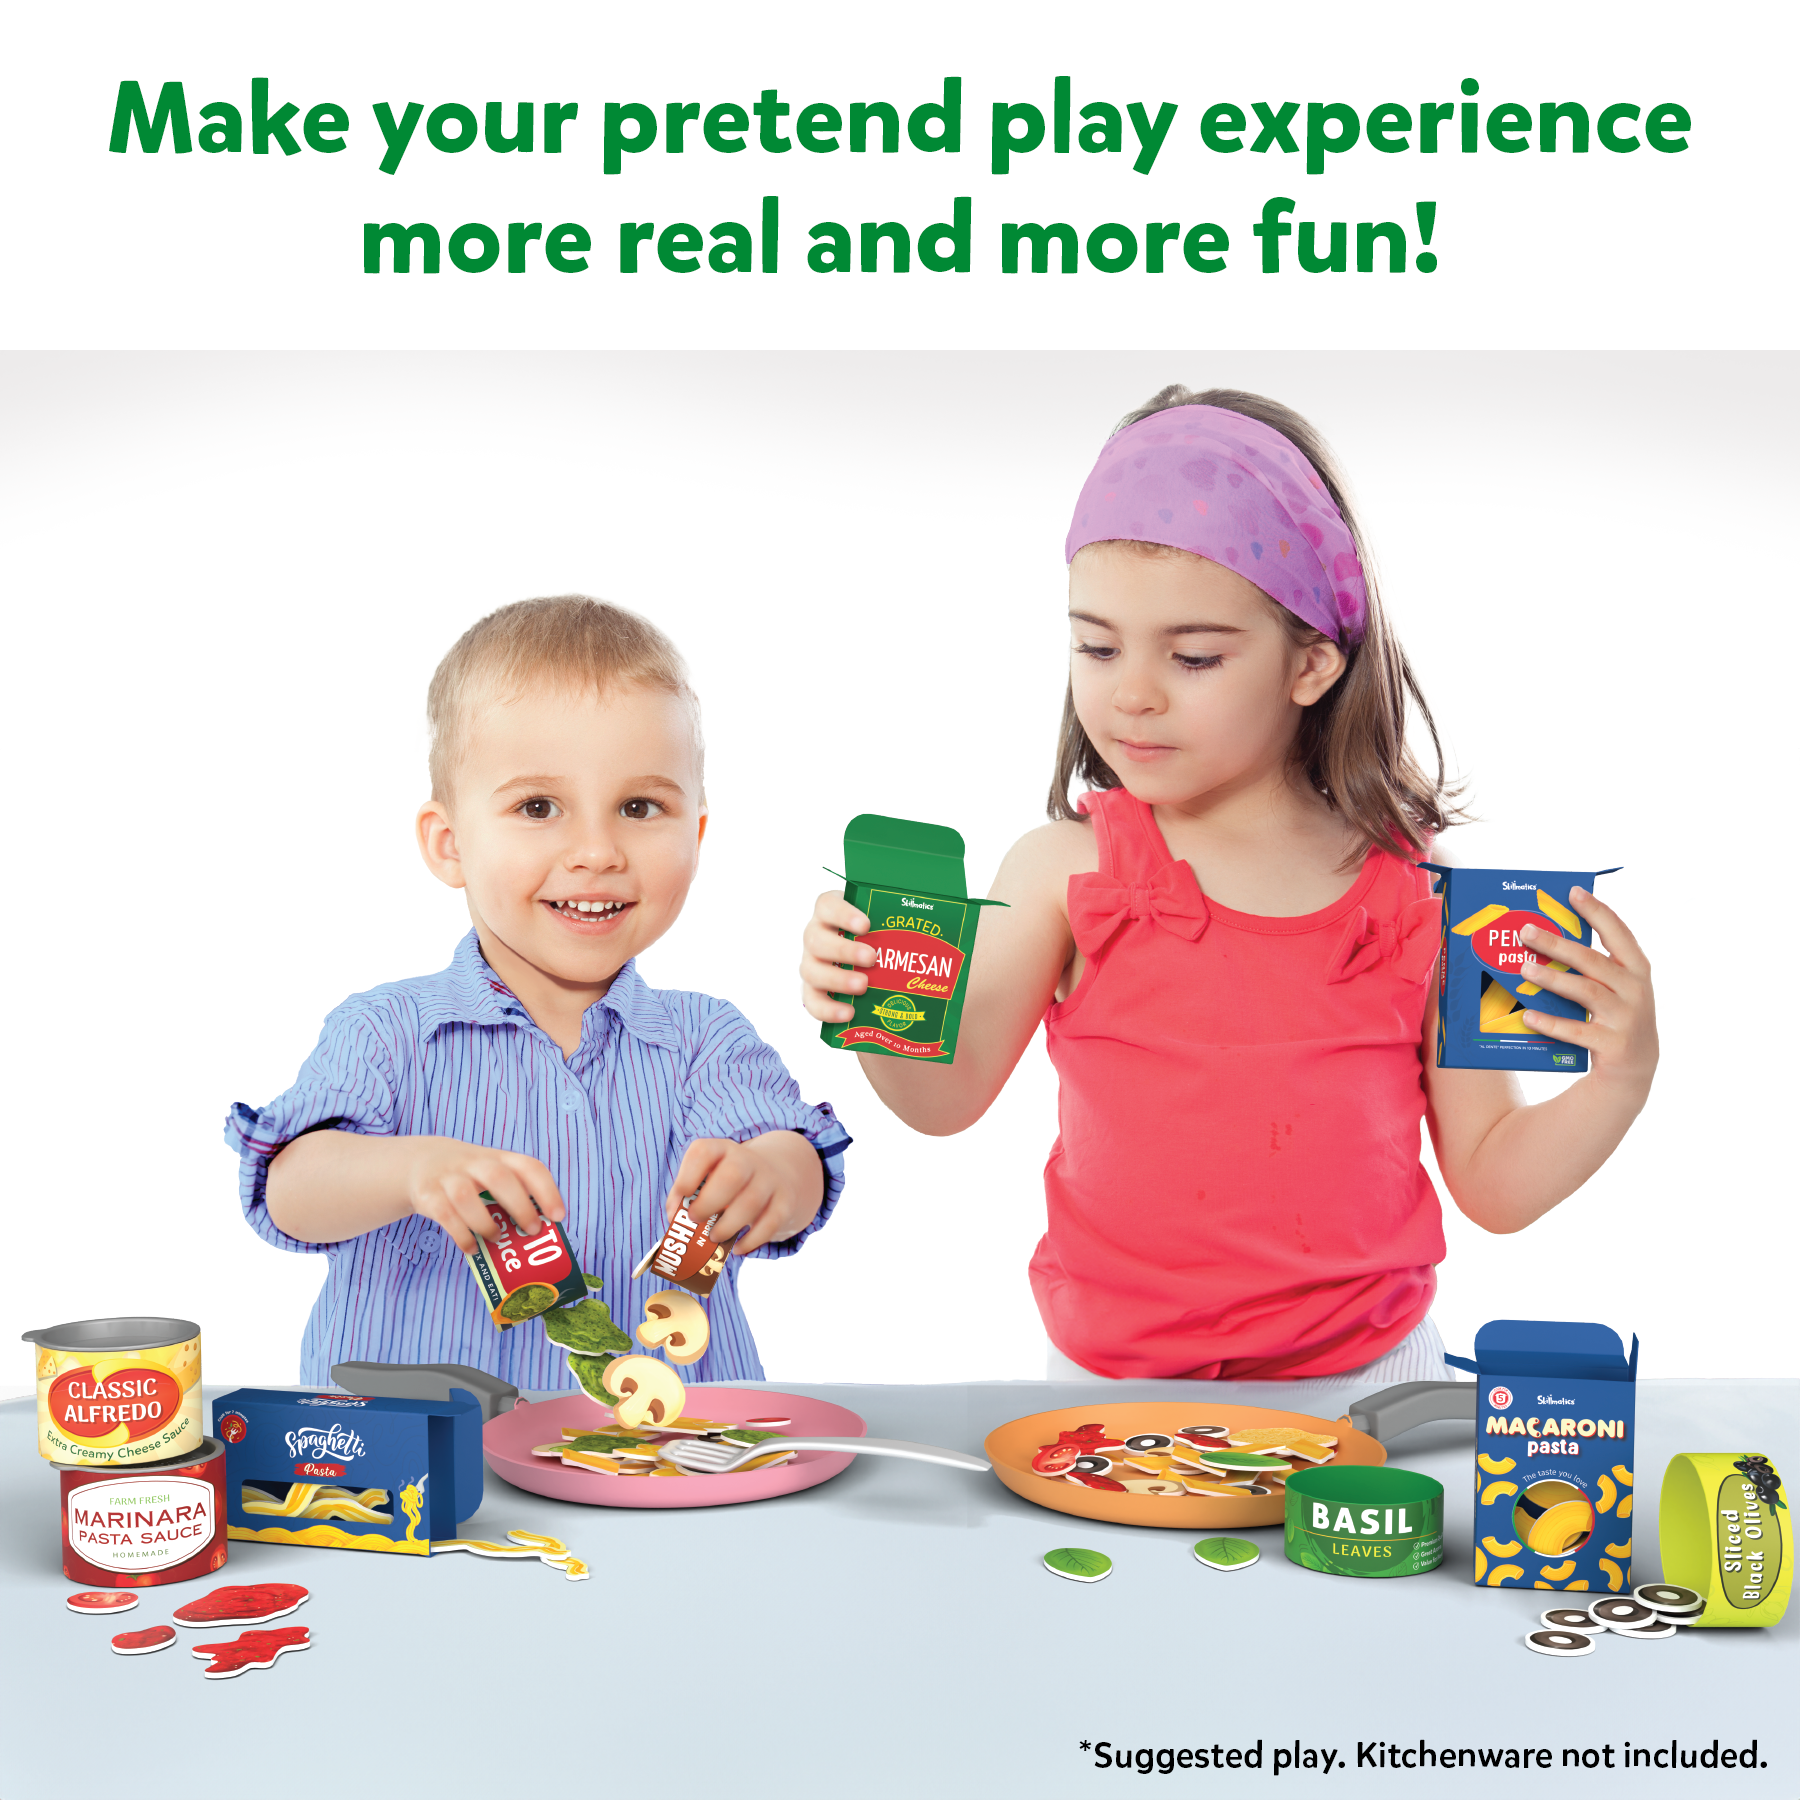 Skillmatics Pretend Play Pasta Set - 11 Containers, 120+ Play Food Items For Child's Play, Back-to-School Play Kitchen Accessories, Toy Kitchen, Gifts for Kids & Toddlers Ages 3, 4, 5, 6, 7